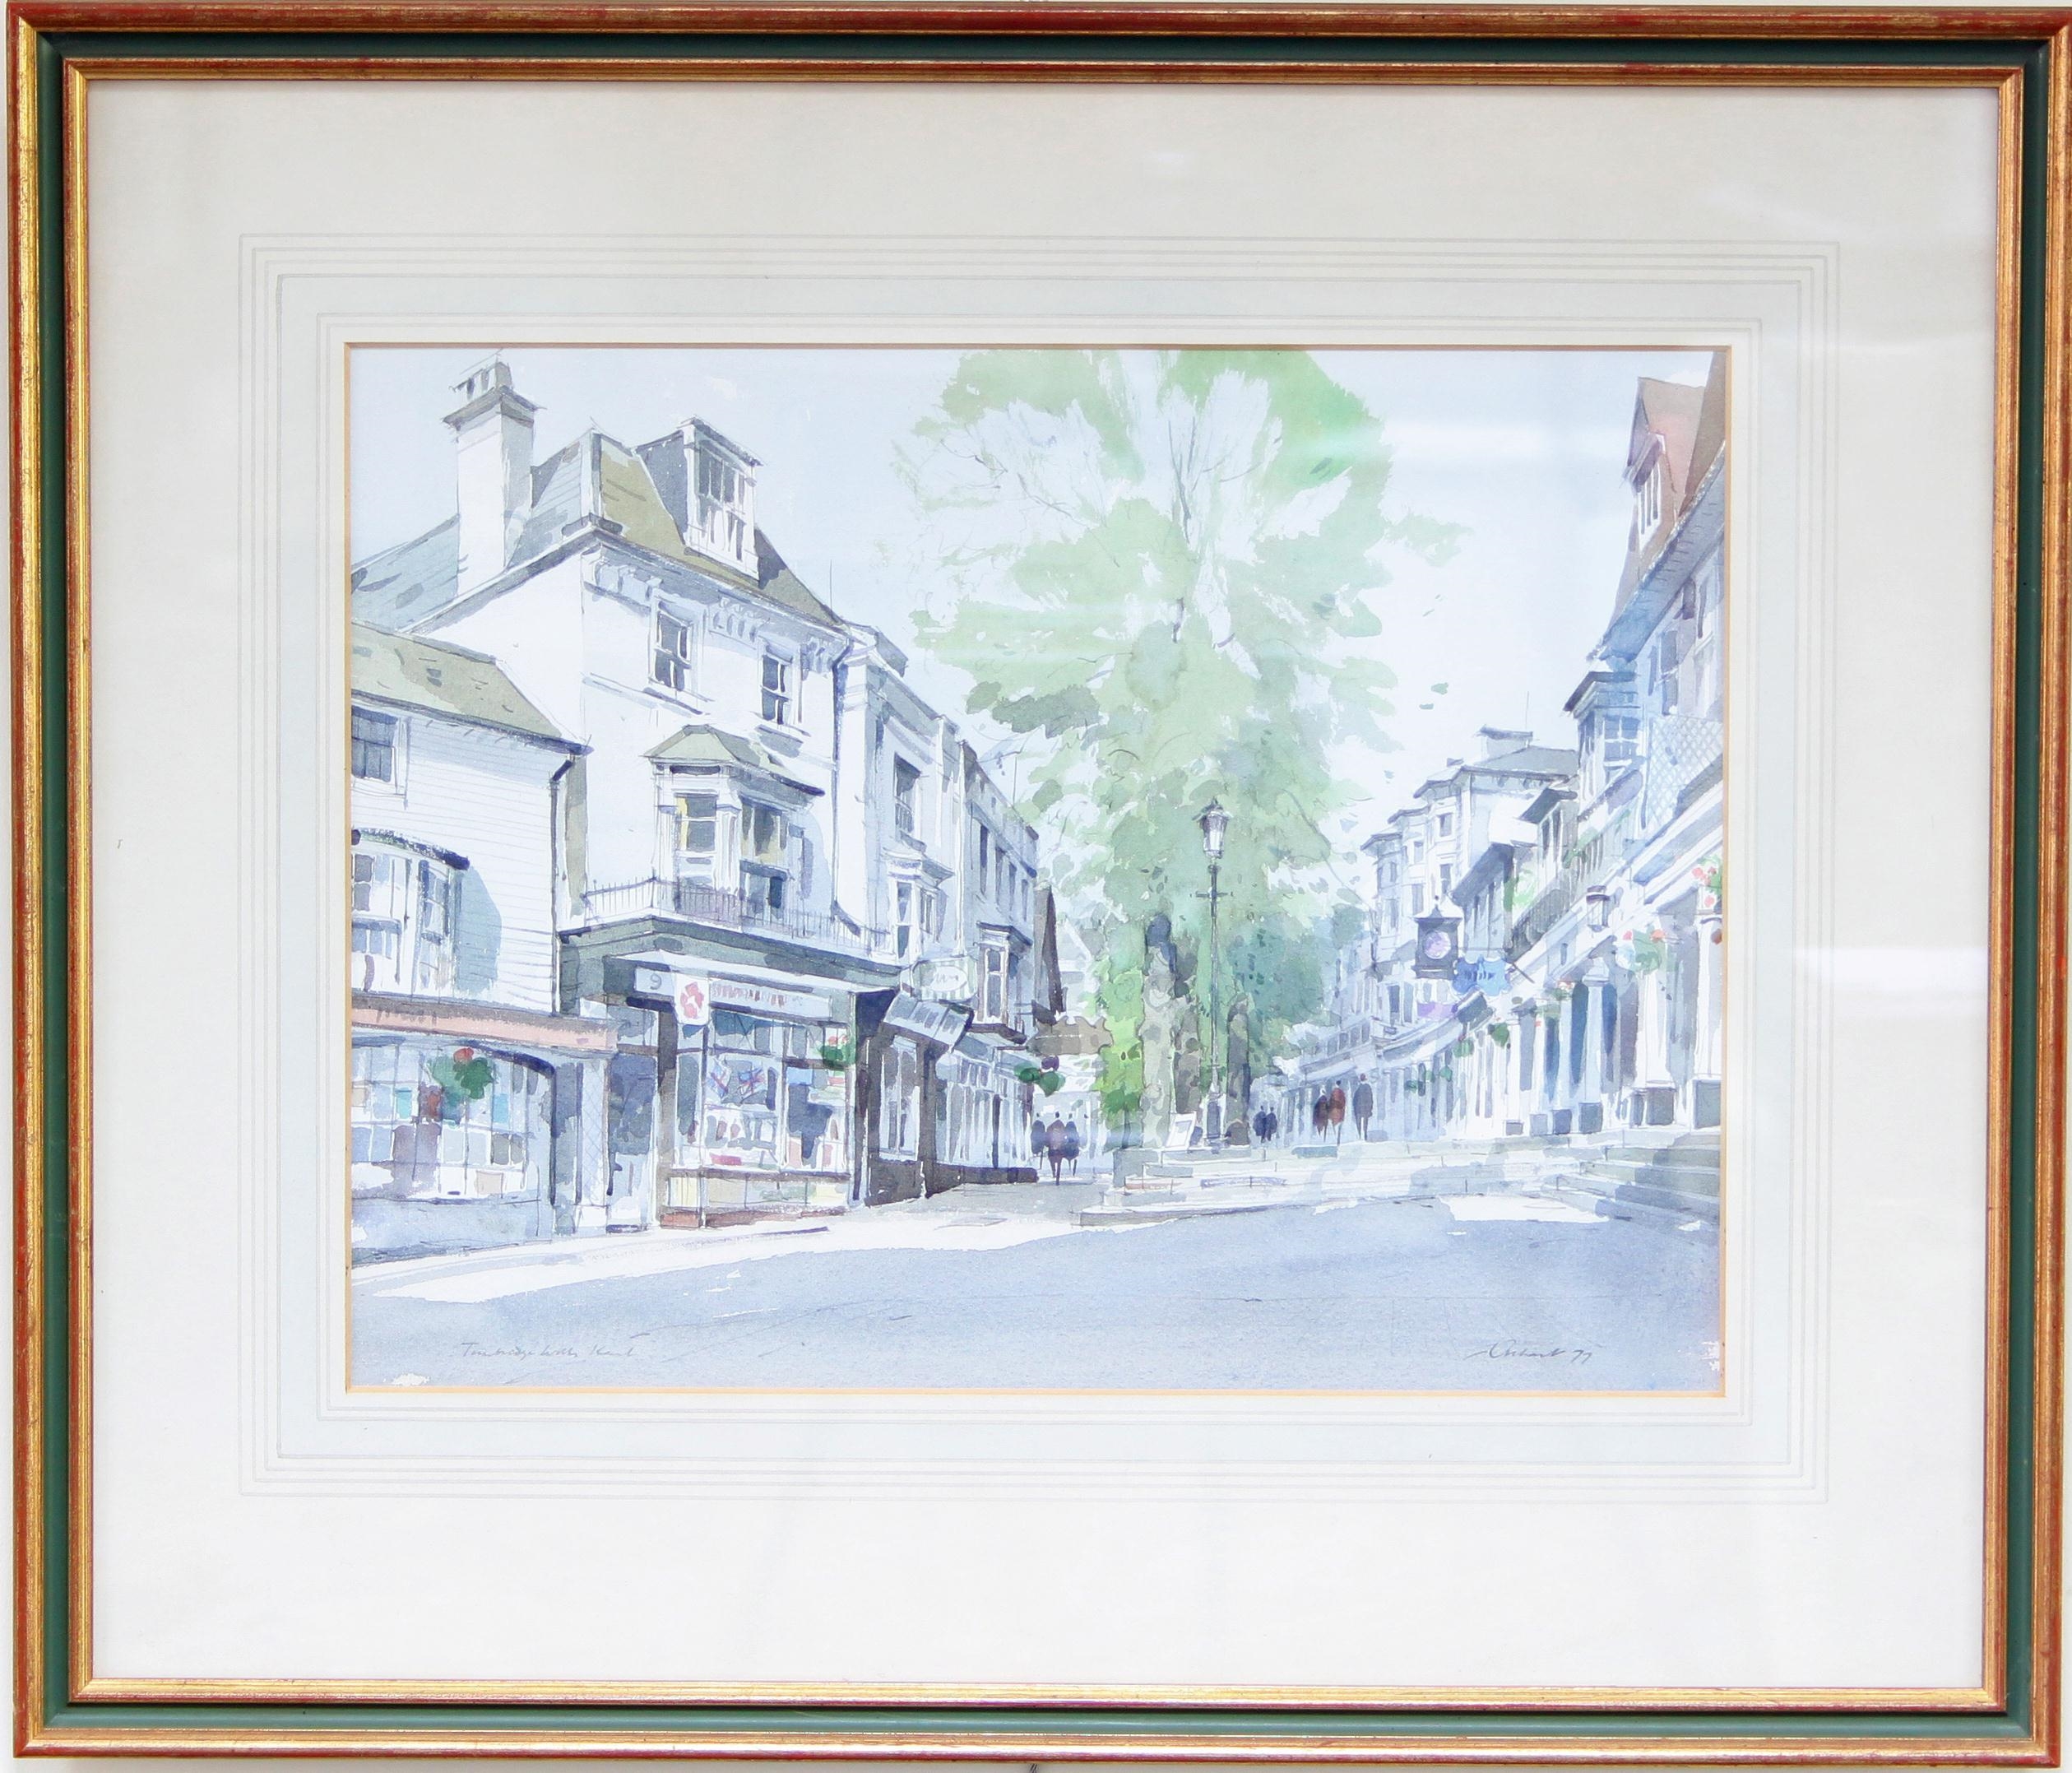 The Pantiles, Tunbridge Wells by Stanley Orchart, 1977